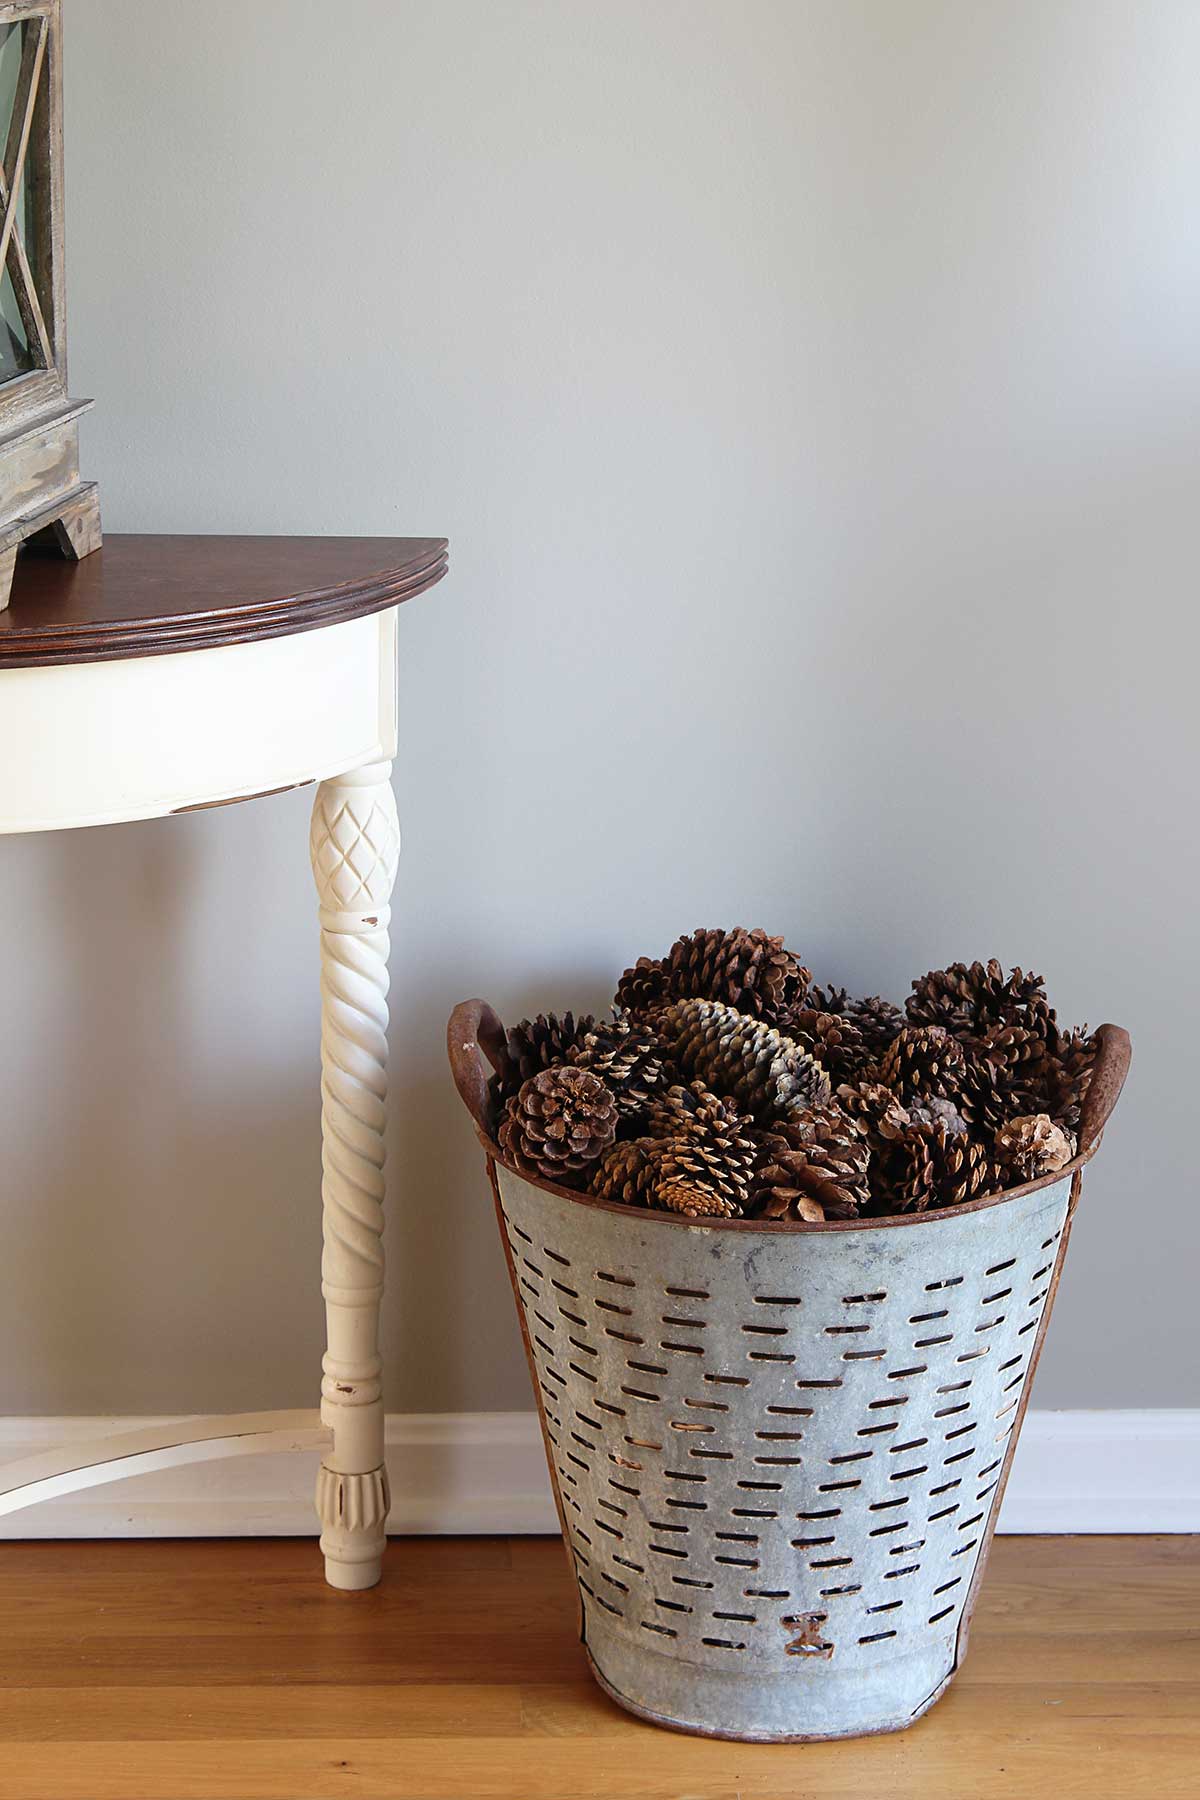 Learn how to use pinecones for winter home decor. Decorating during that awkward time between Christmas decor coming down and spring decor going up.